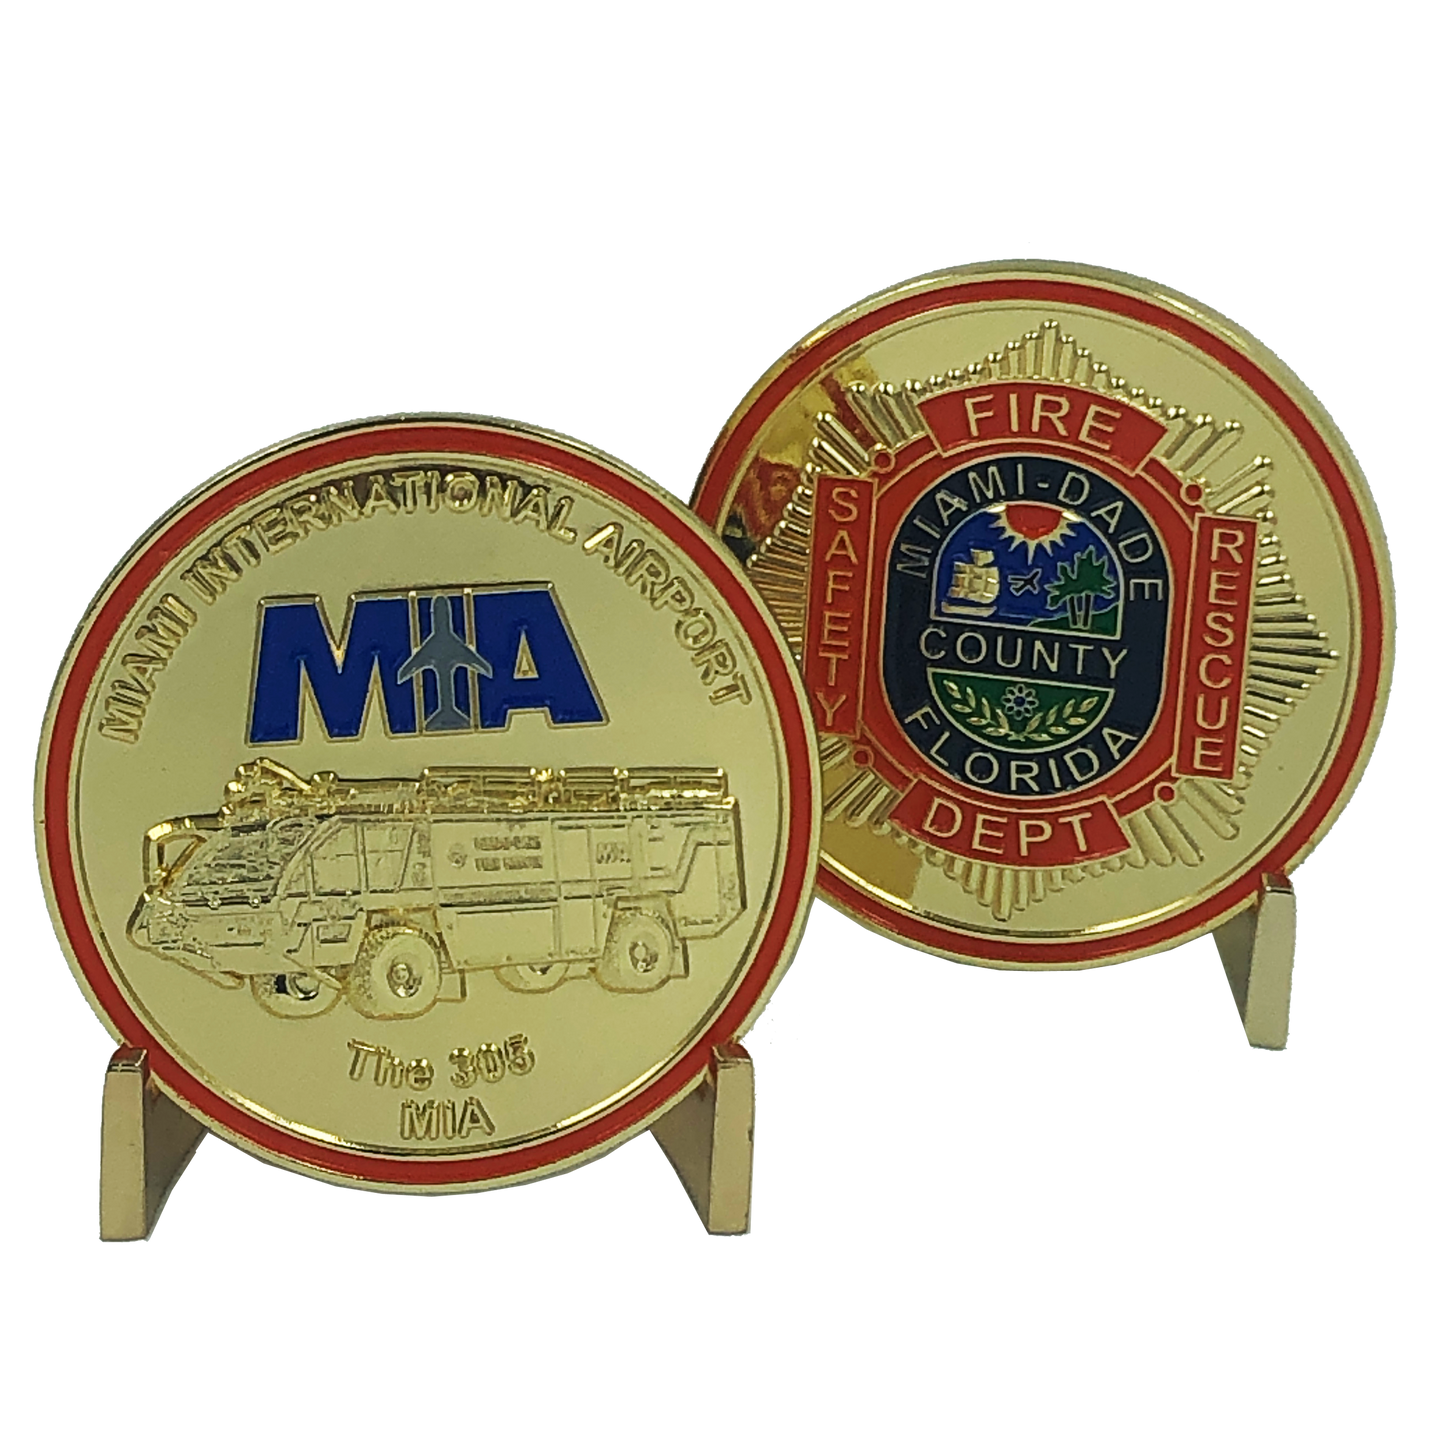 I-014 MIAMI DADE County FIRE RESCUE MIA International Airport CHALLENGE COIN department